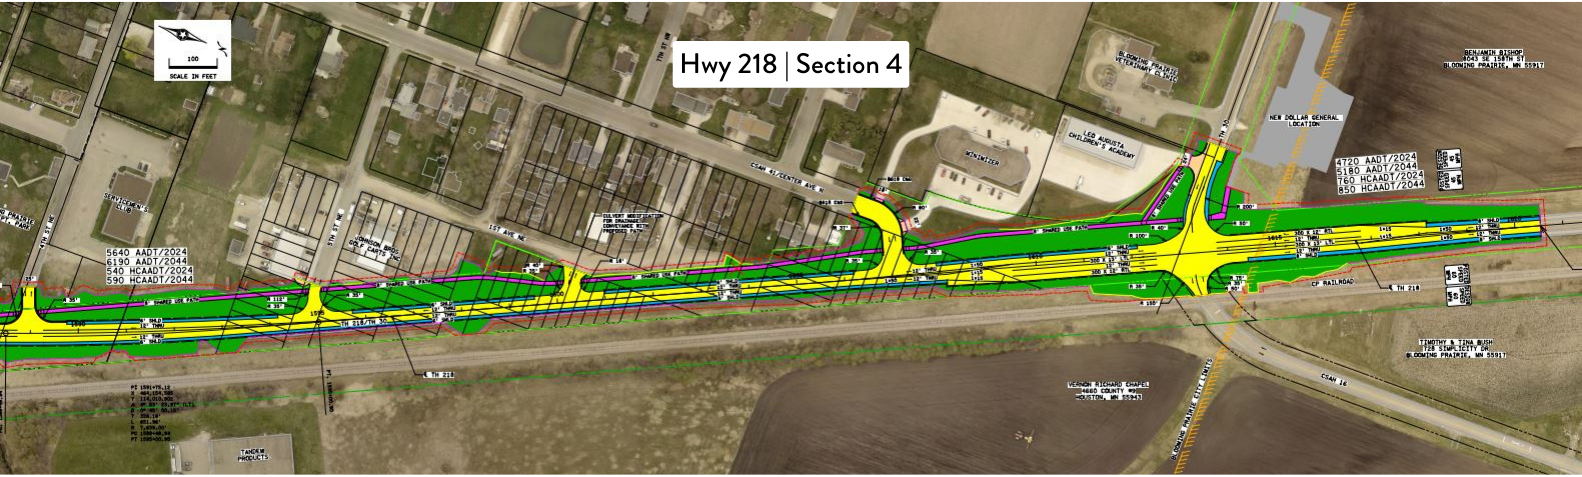 A section of the Hwy 218 design from 100th Ave to 4th St. SE